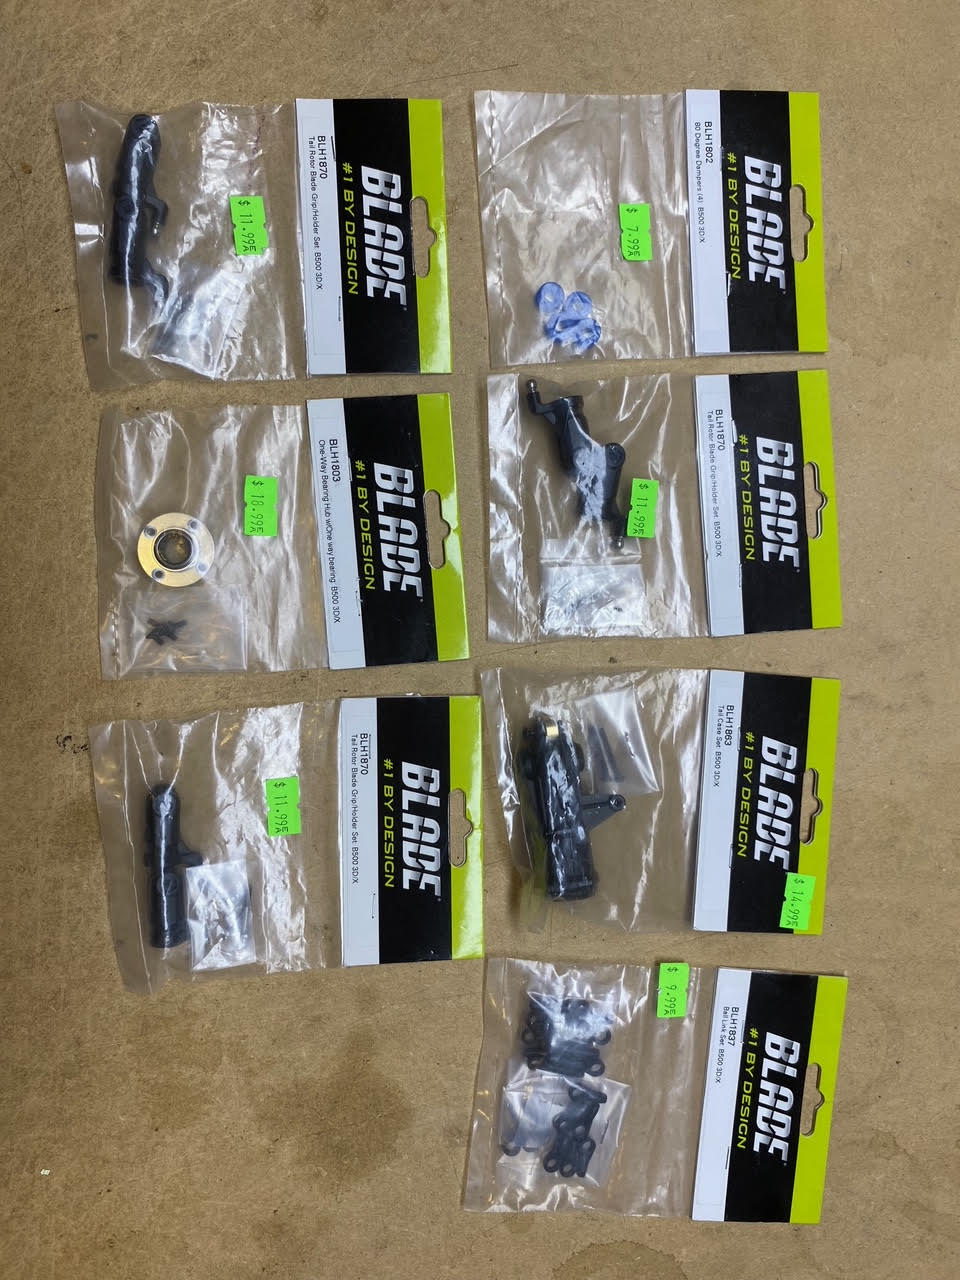 Blade 500 3D/X Helicopter Bundle Spares** - Hobbytech Toys